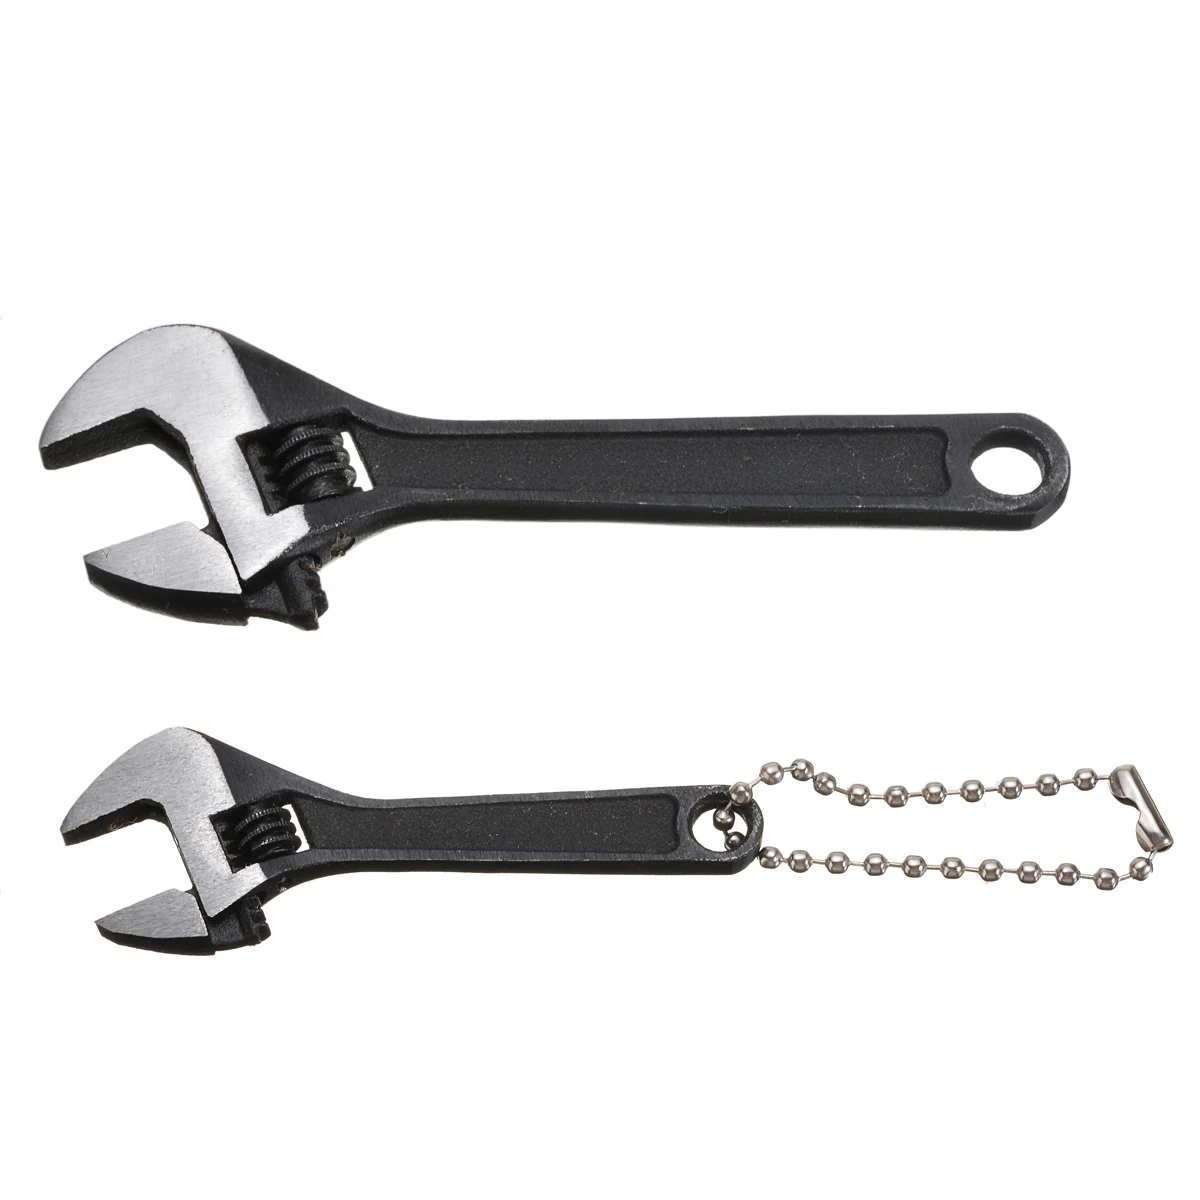 2.5" Mini Small Adjustable Wrench Open Spanner Alloy Repair E6B4 Steel Y6J0